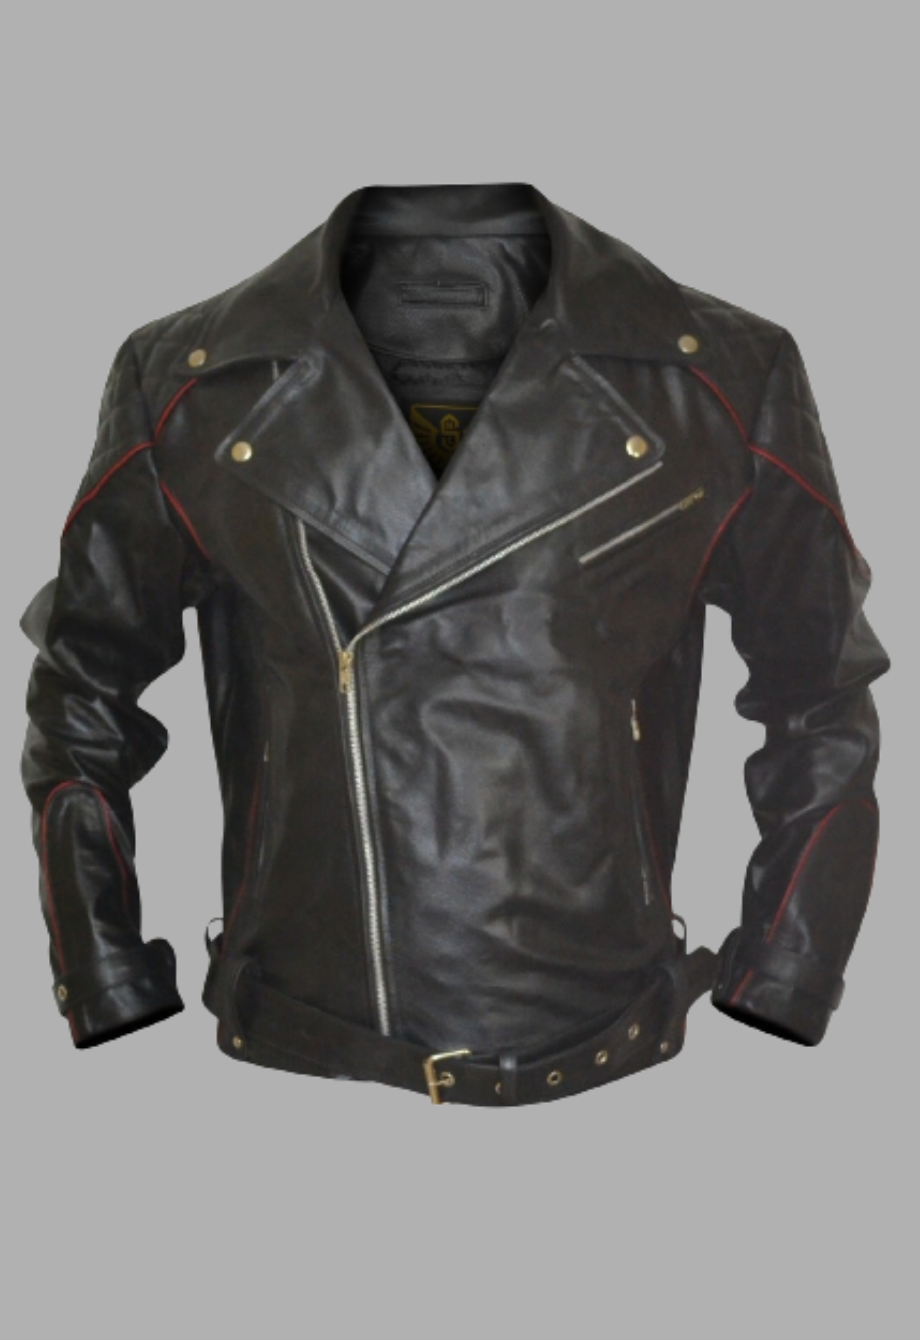 Black Leather Biker Jacket With Red Piping Design Men's